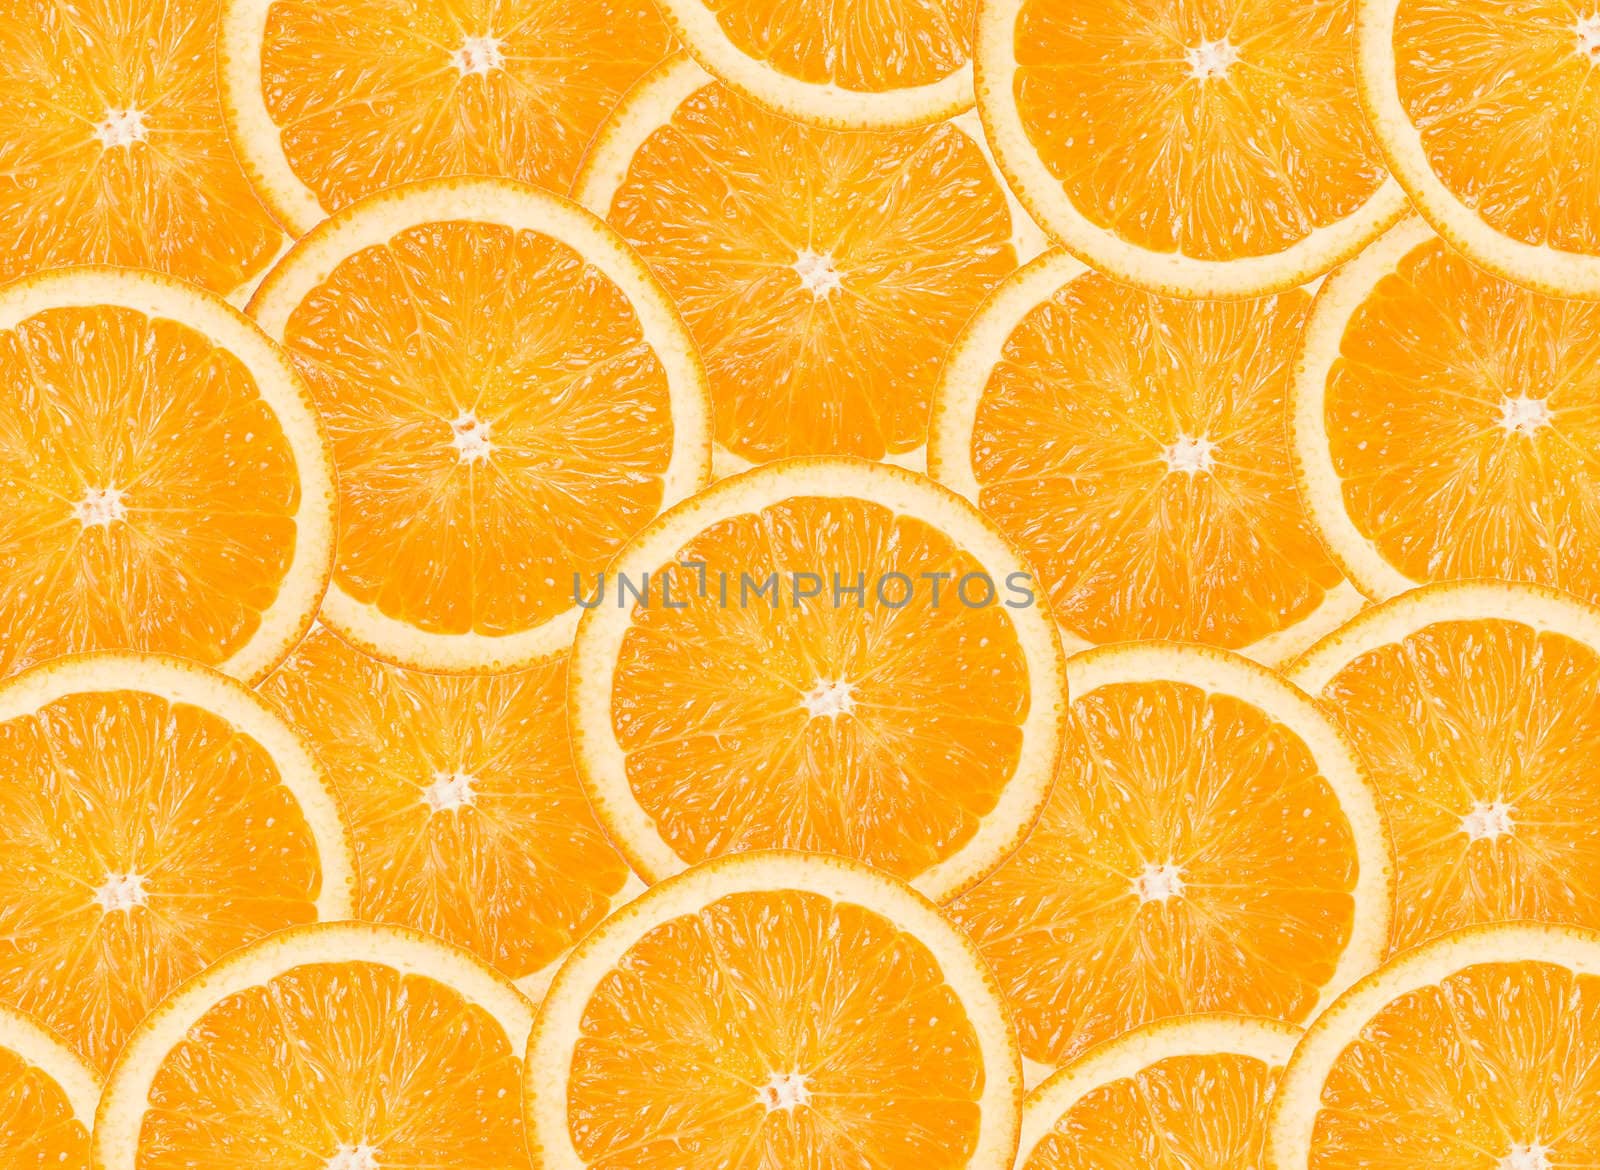 background from orange slices by Alekcey